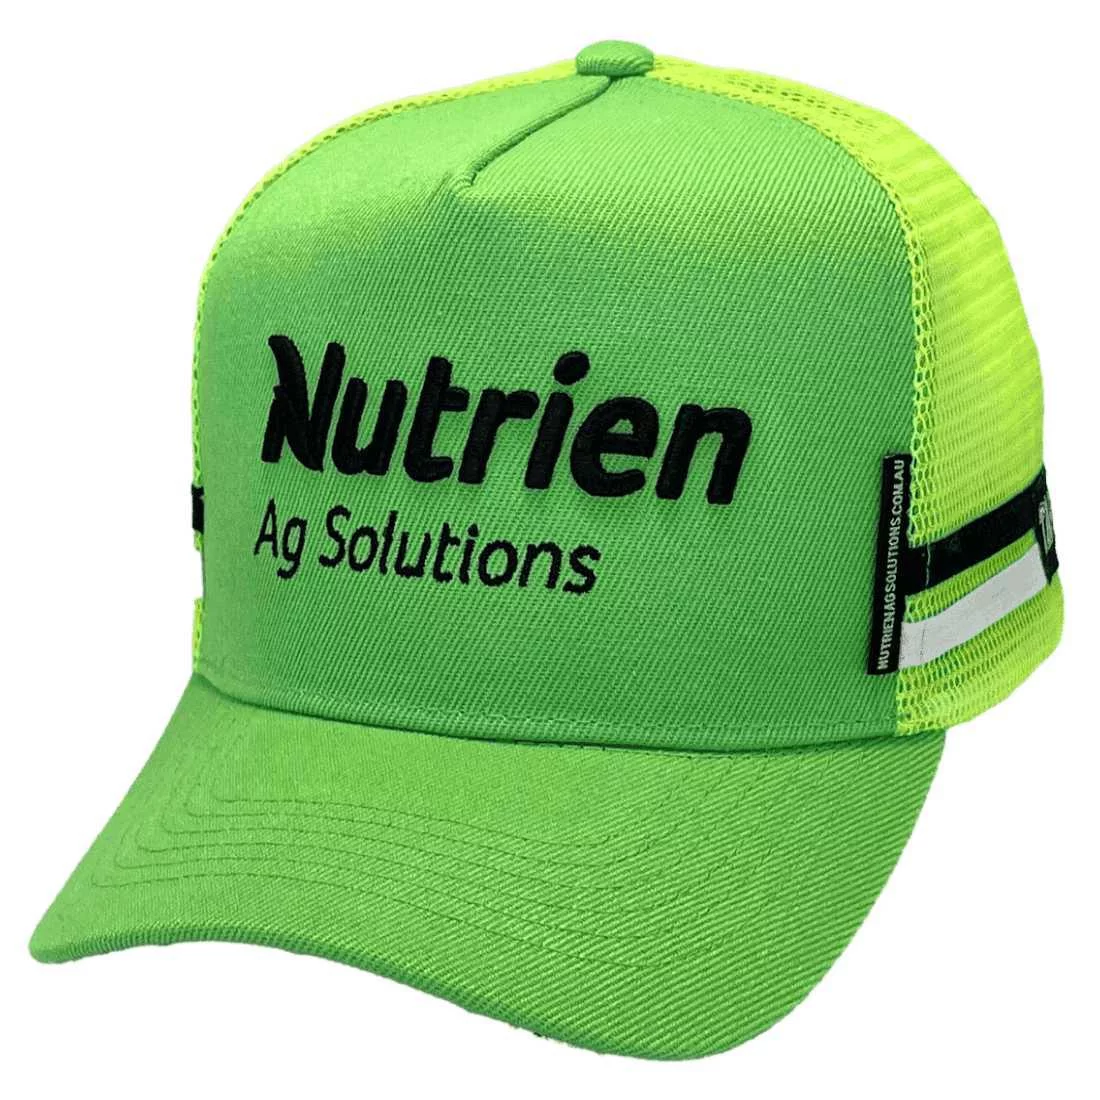 Nutrien Ag Solutions HP Original Midrange Aussie Trucker Hat with two side bands -lime green/black/white